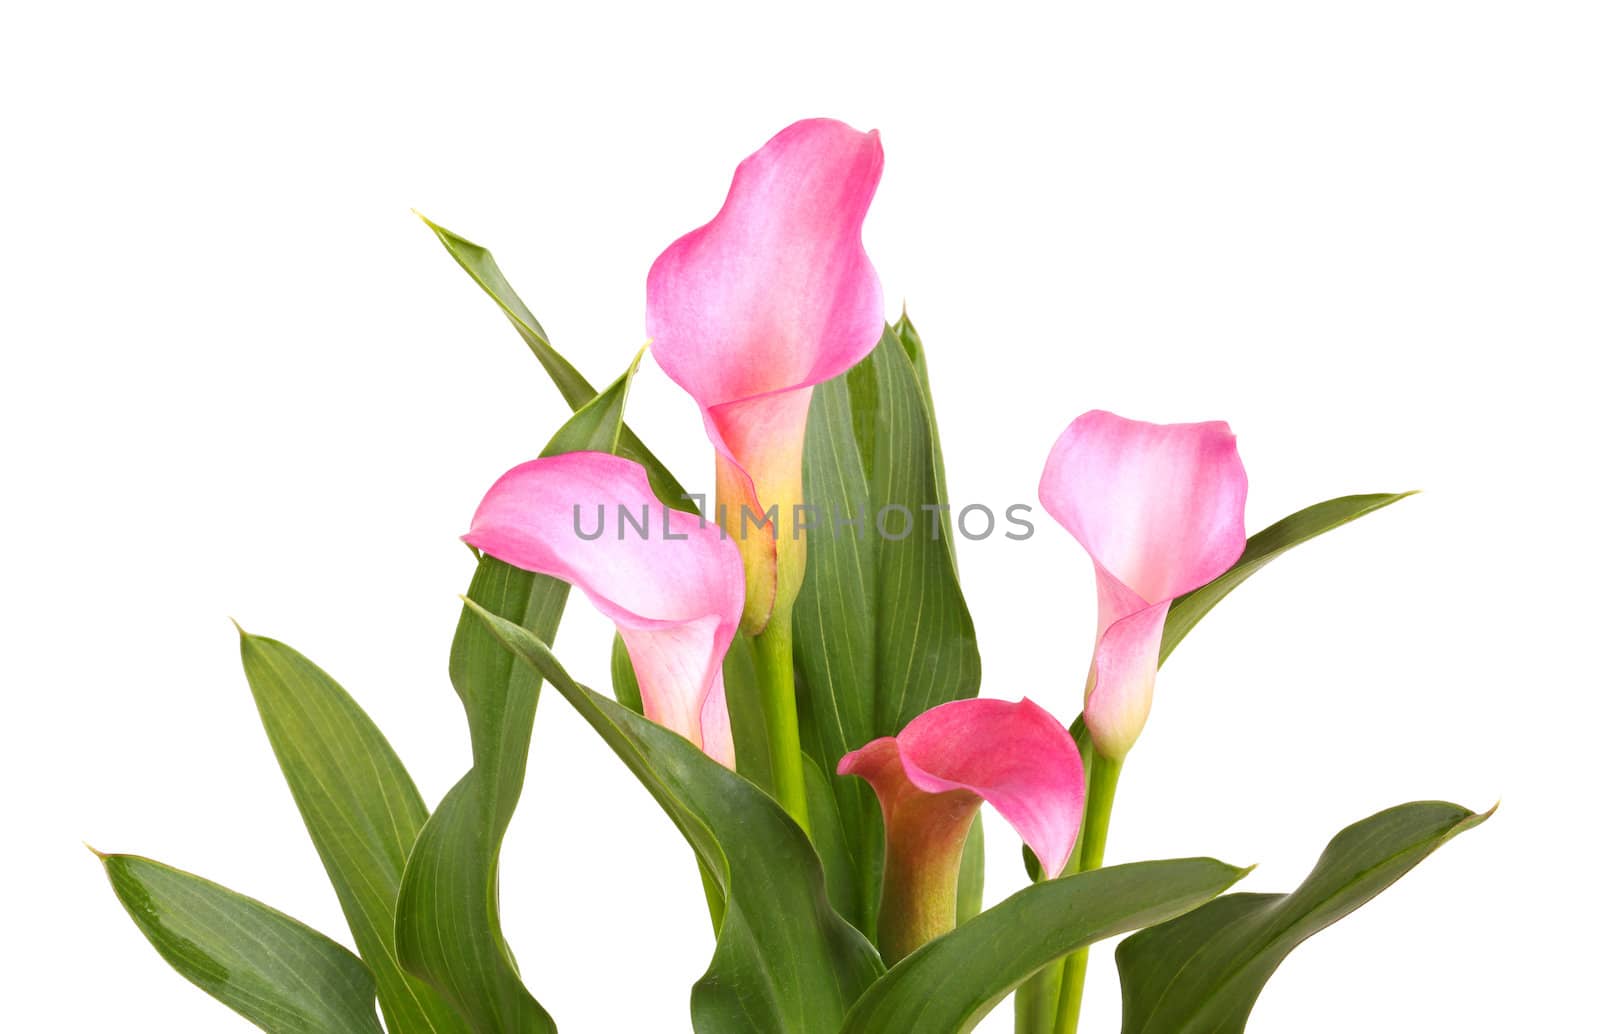 Four flowers of a pink calla lily cultivar (Zantedeschia species) and healthy green leaves isolated against a white background